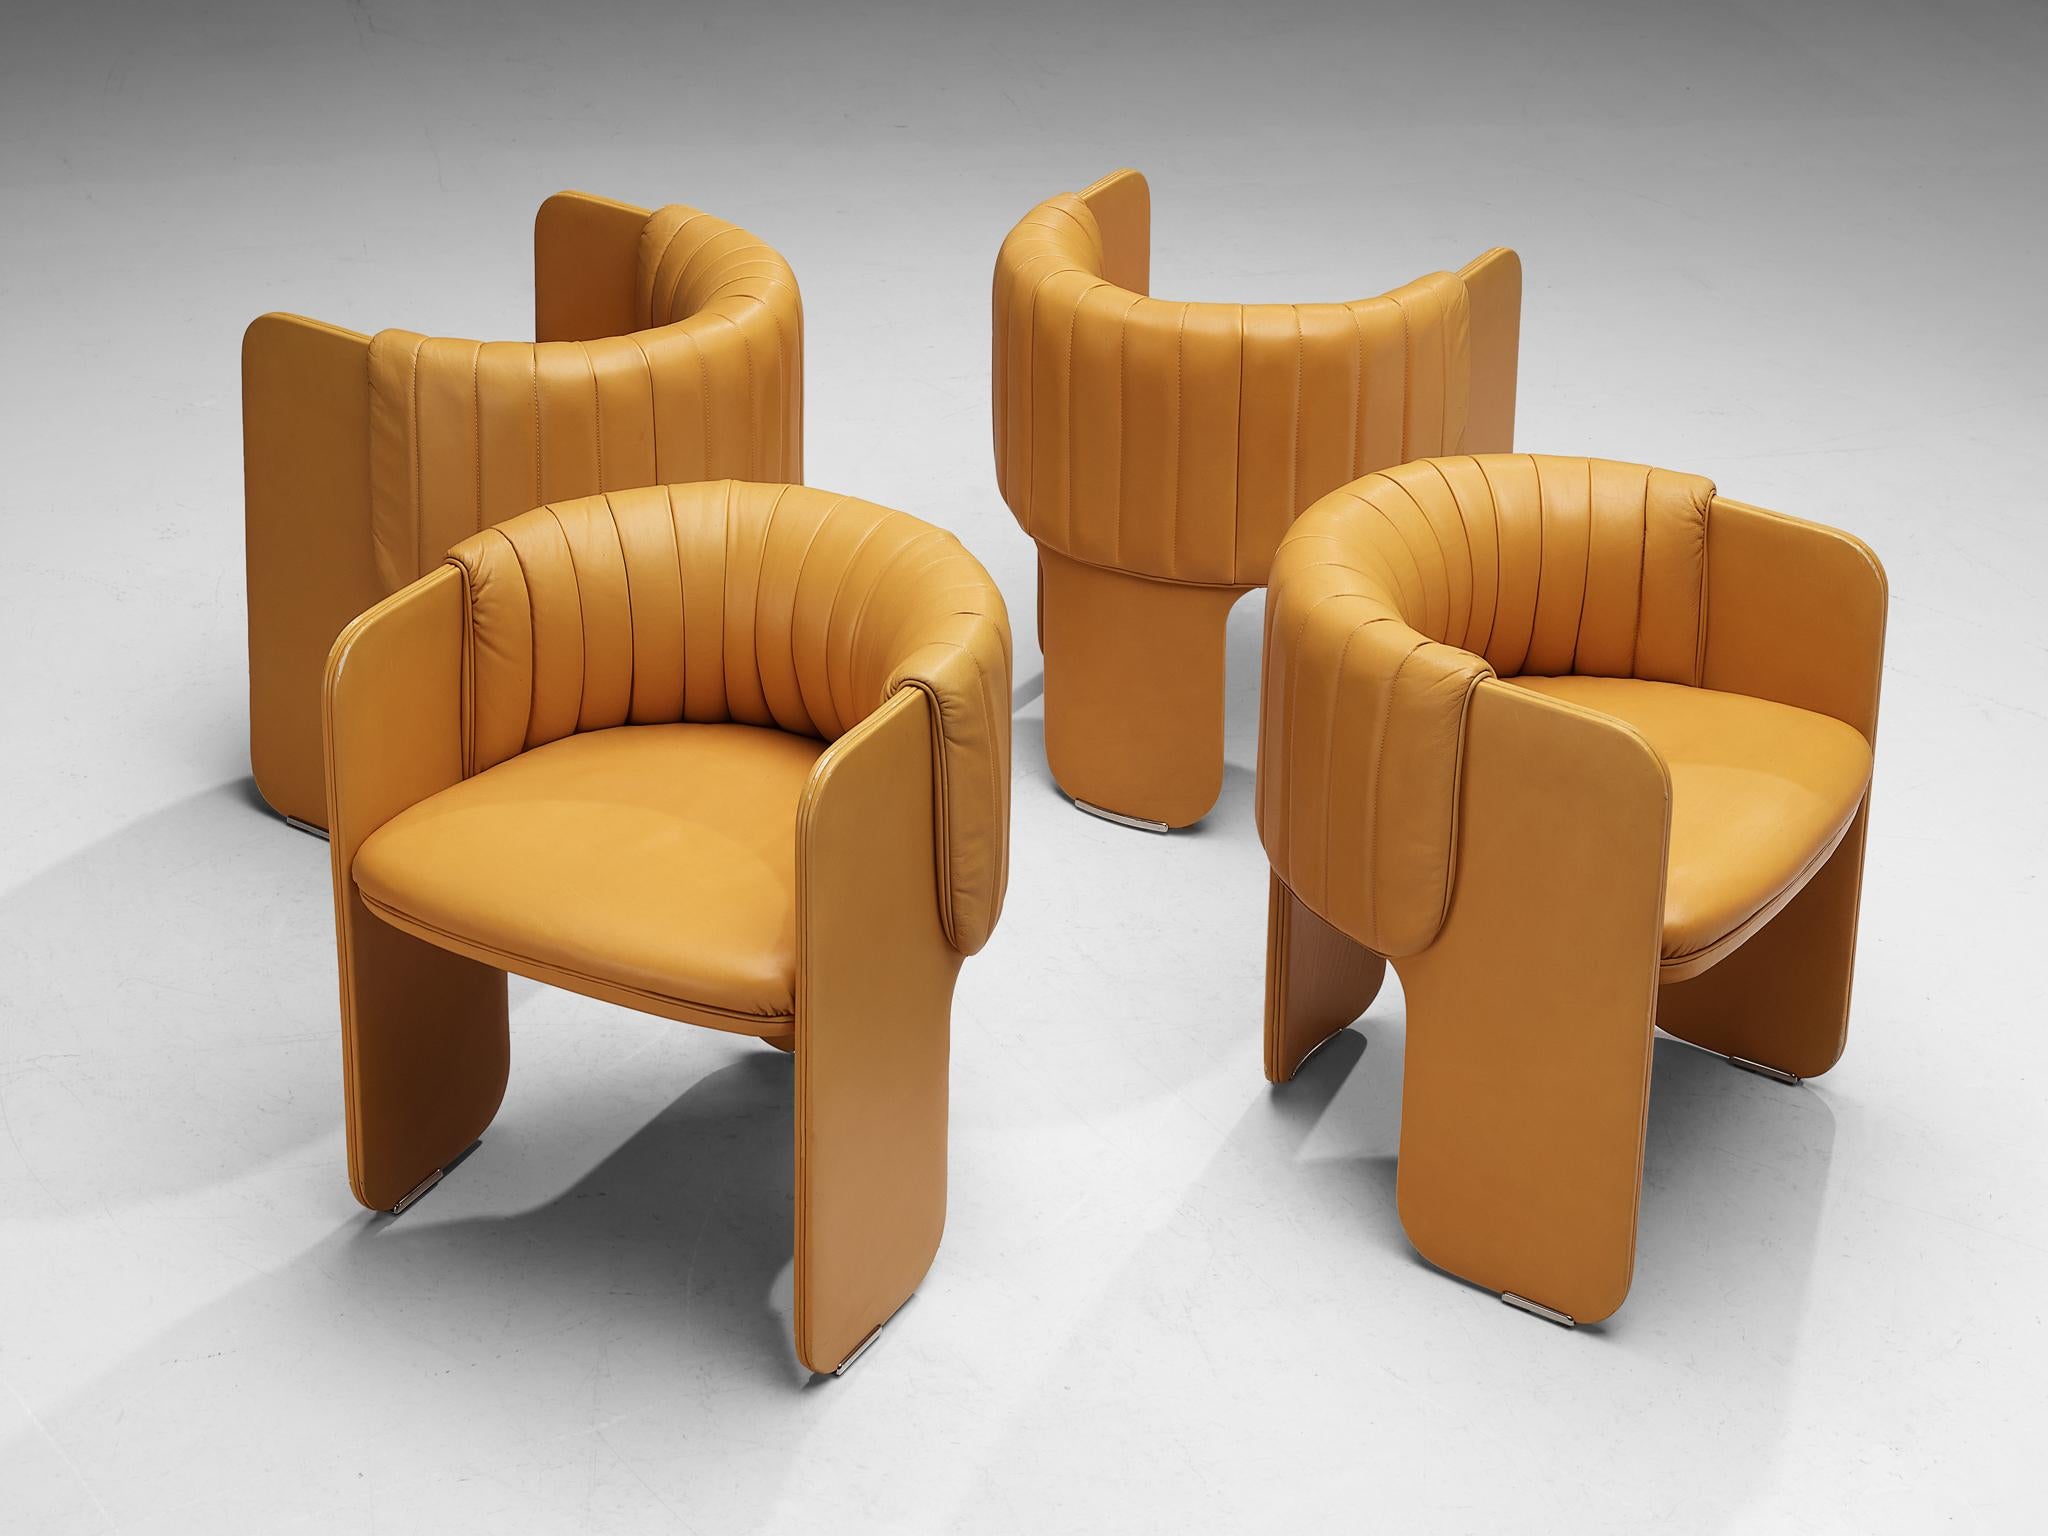 Luigi Massoni for Poltrona Frau, set of four armchairs model ‘Dinette’, leather, chromed steel, Italy, 1980s

This set of armchairs epitomizes a splendid construction based on characteristic shapes and executed in a vivid orange leather.